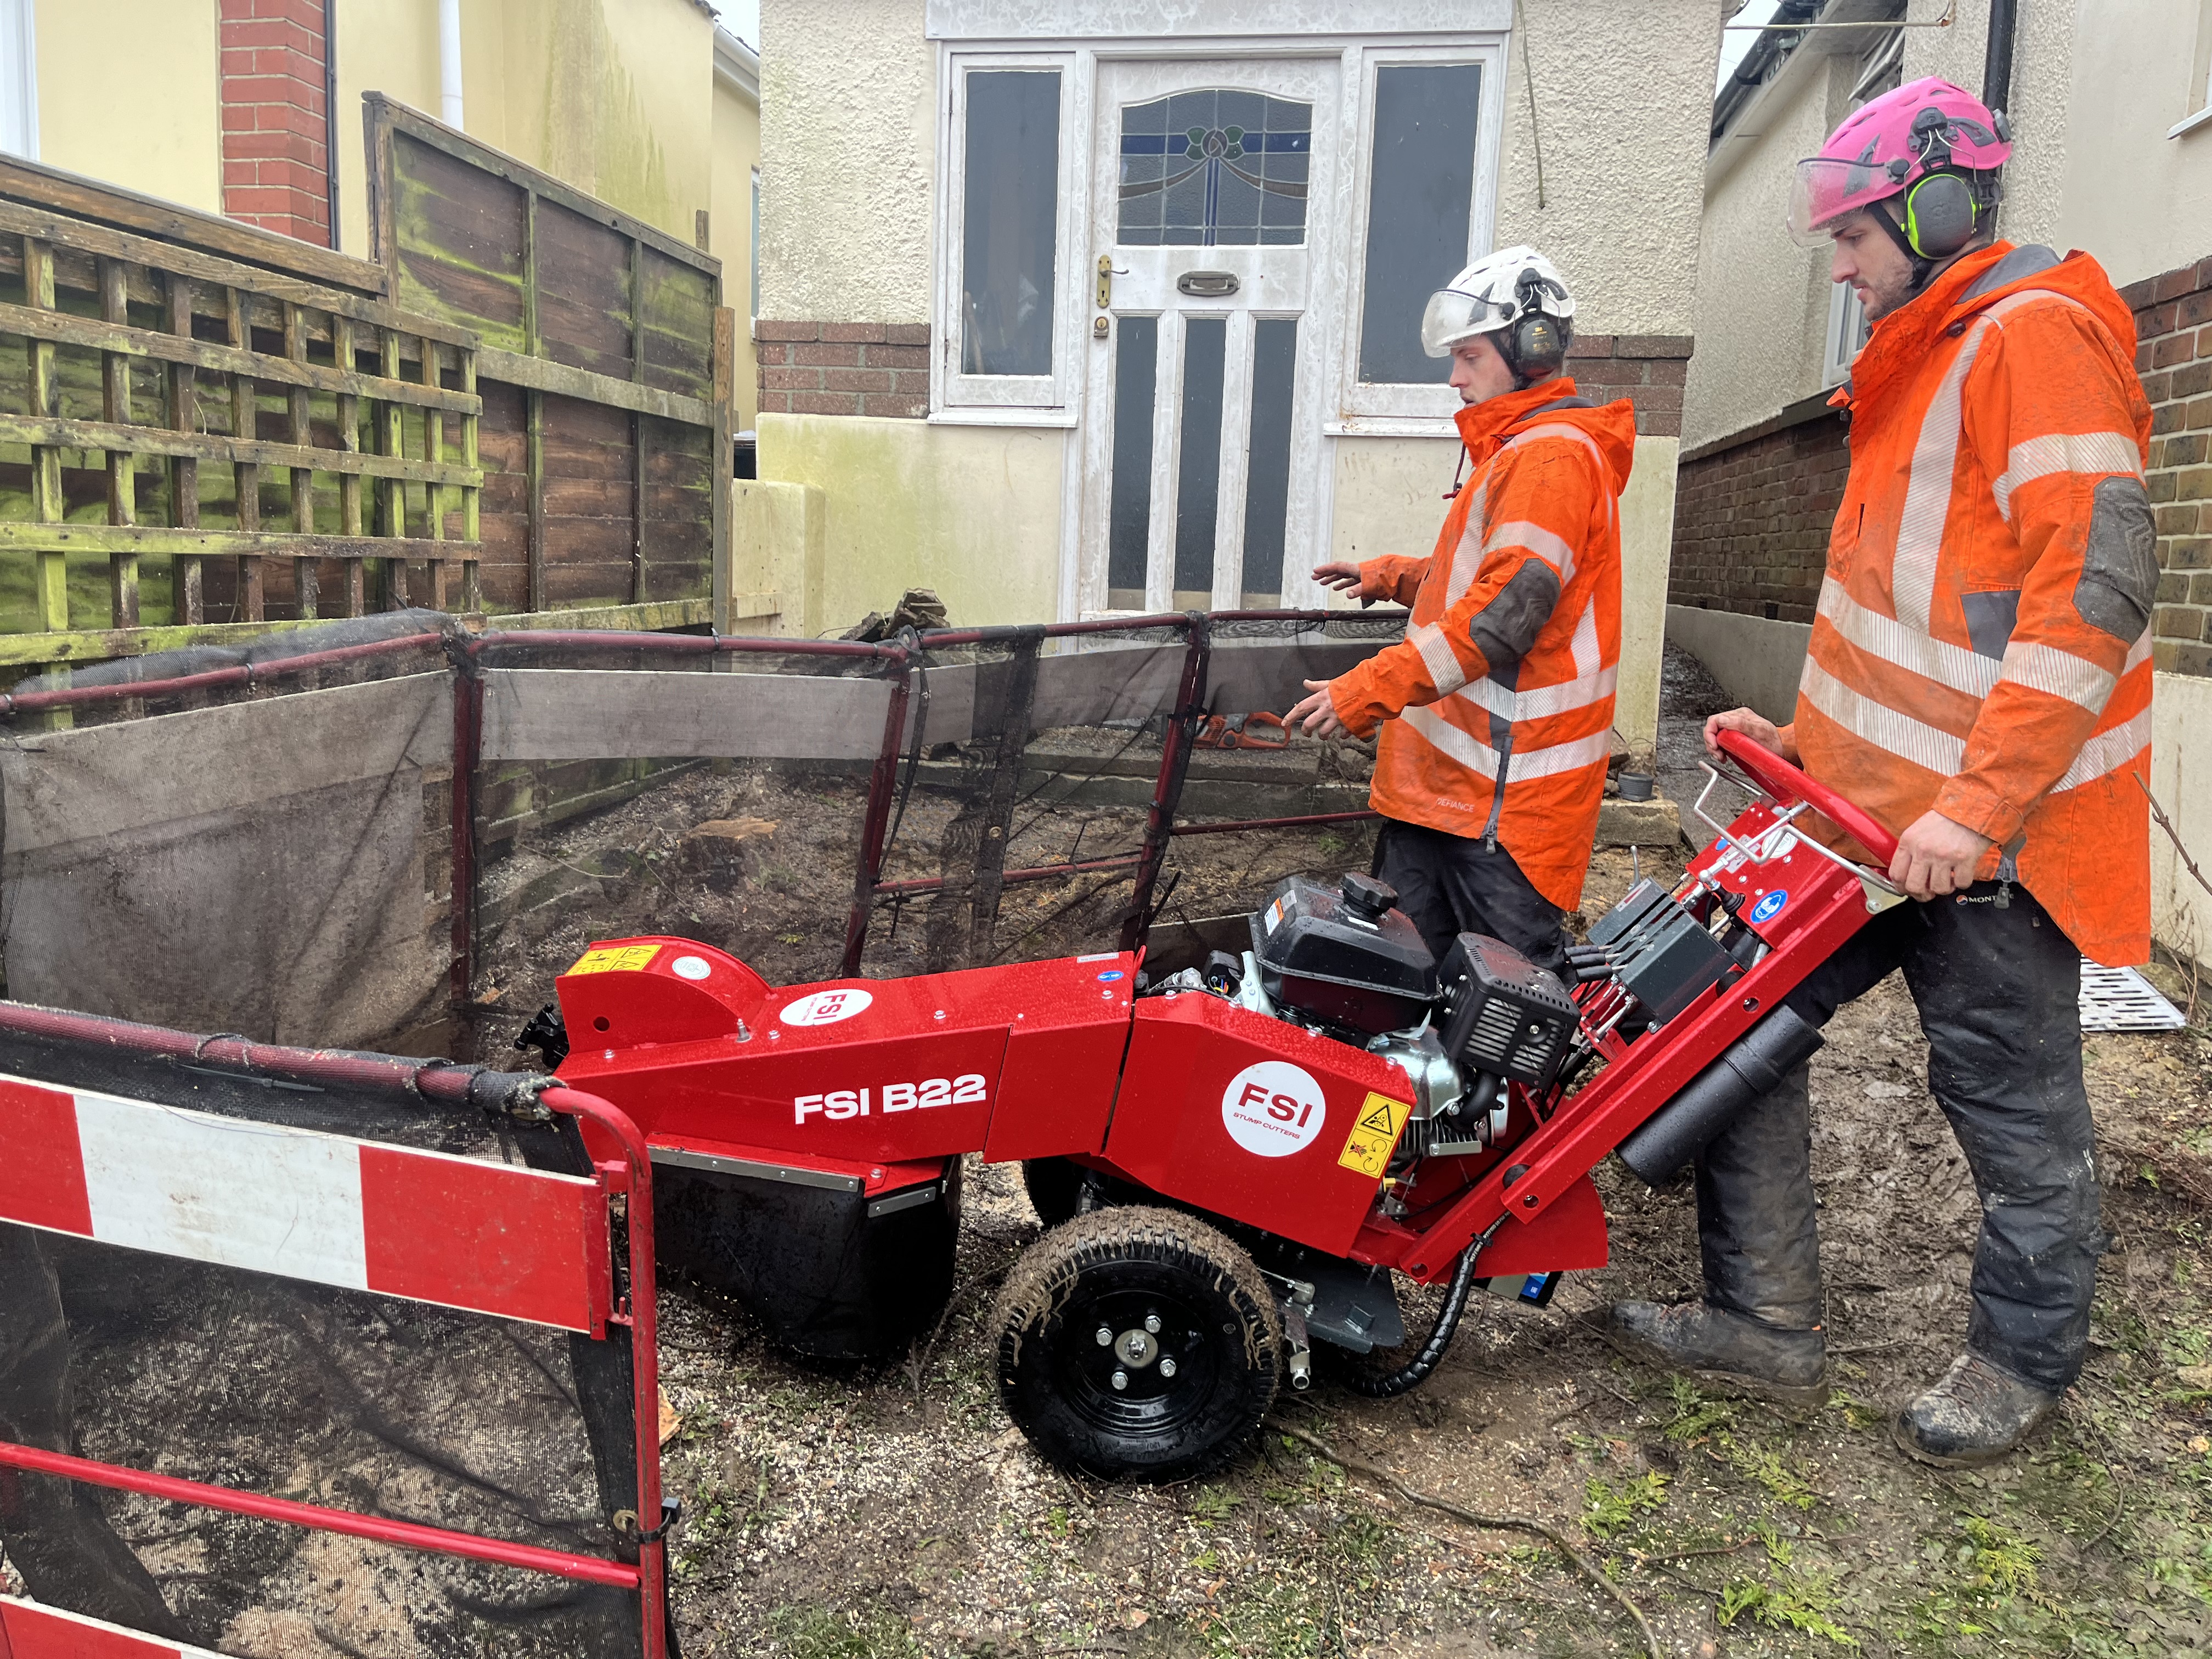 Tree Surgeon Weymouth | Tree stump removal by grinding in Weymouth, Portland, Dorchester, Dorset